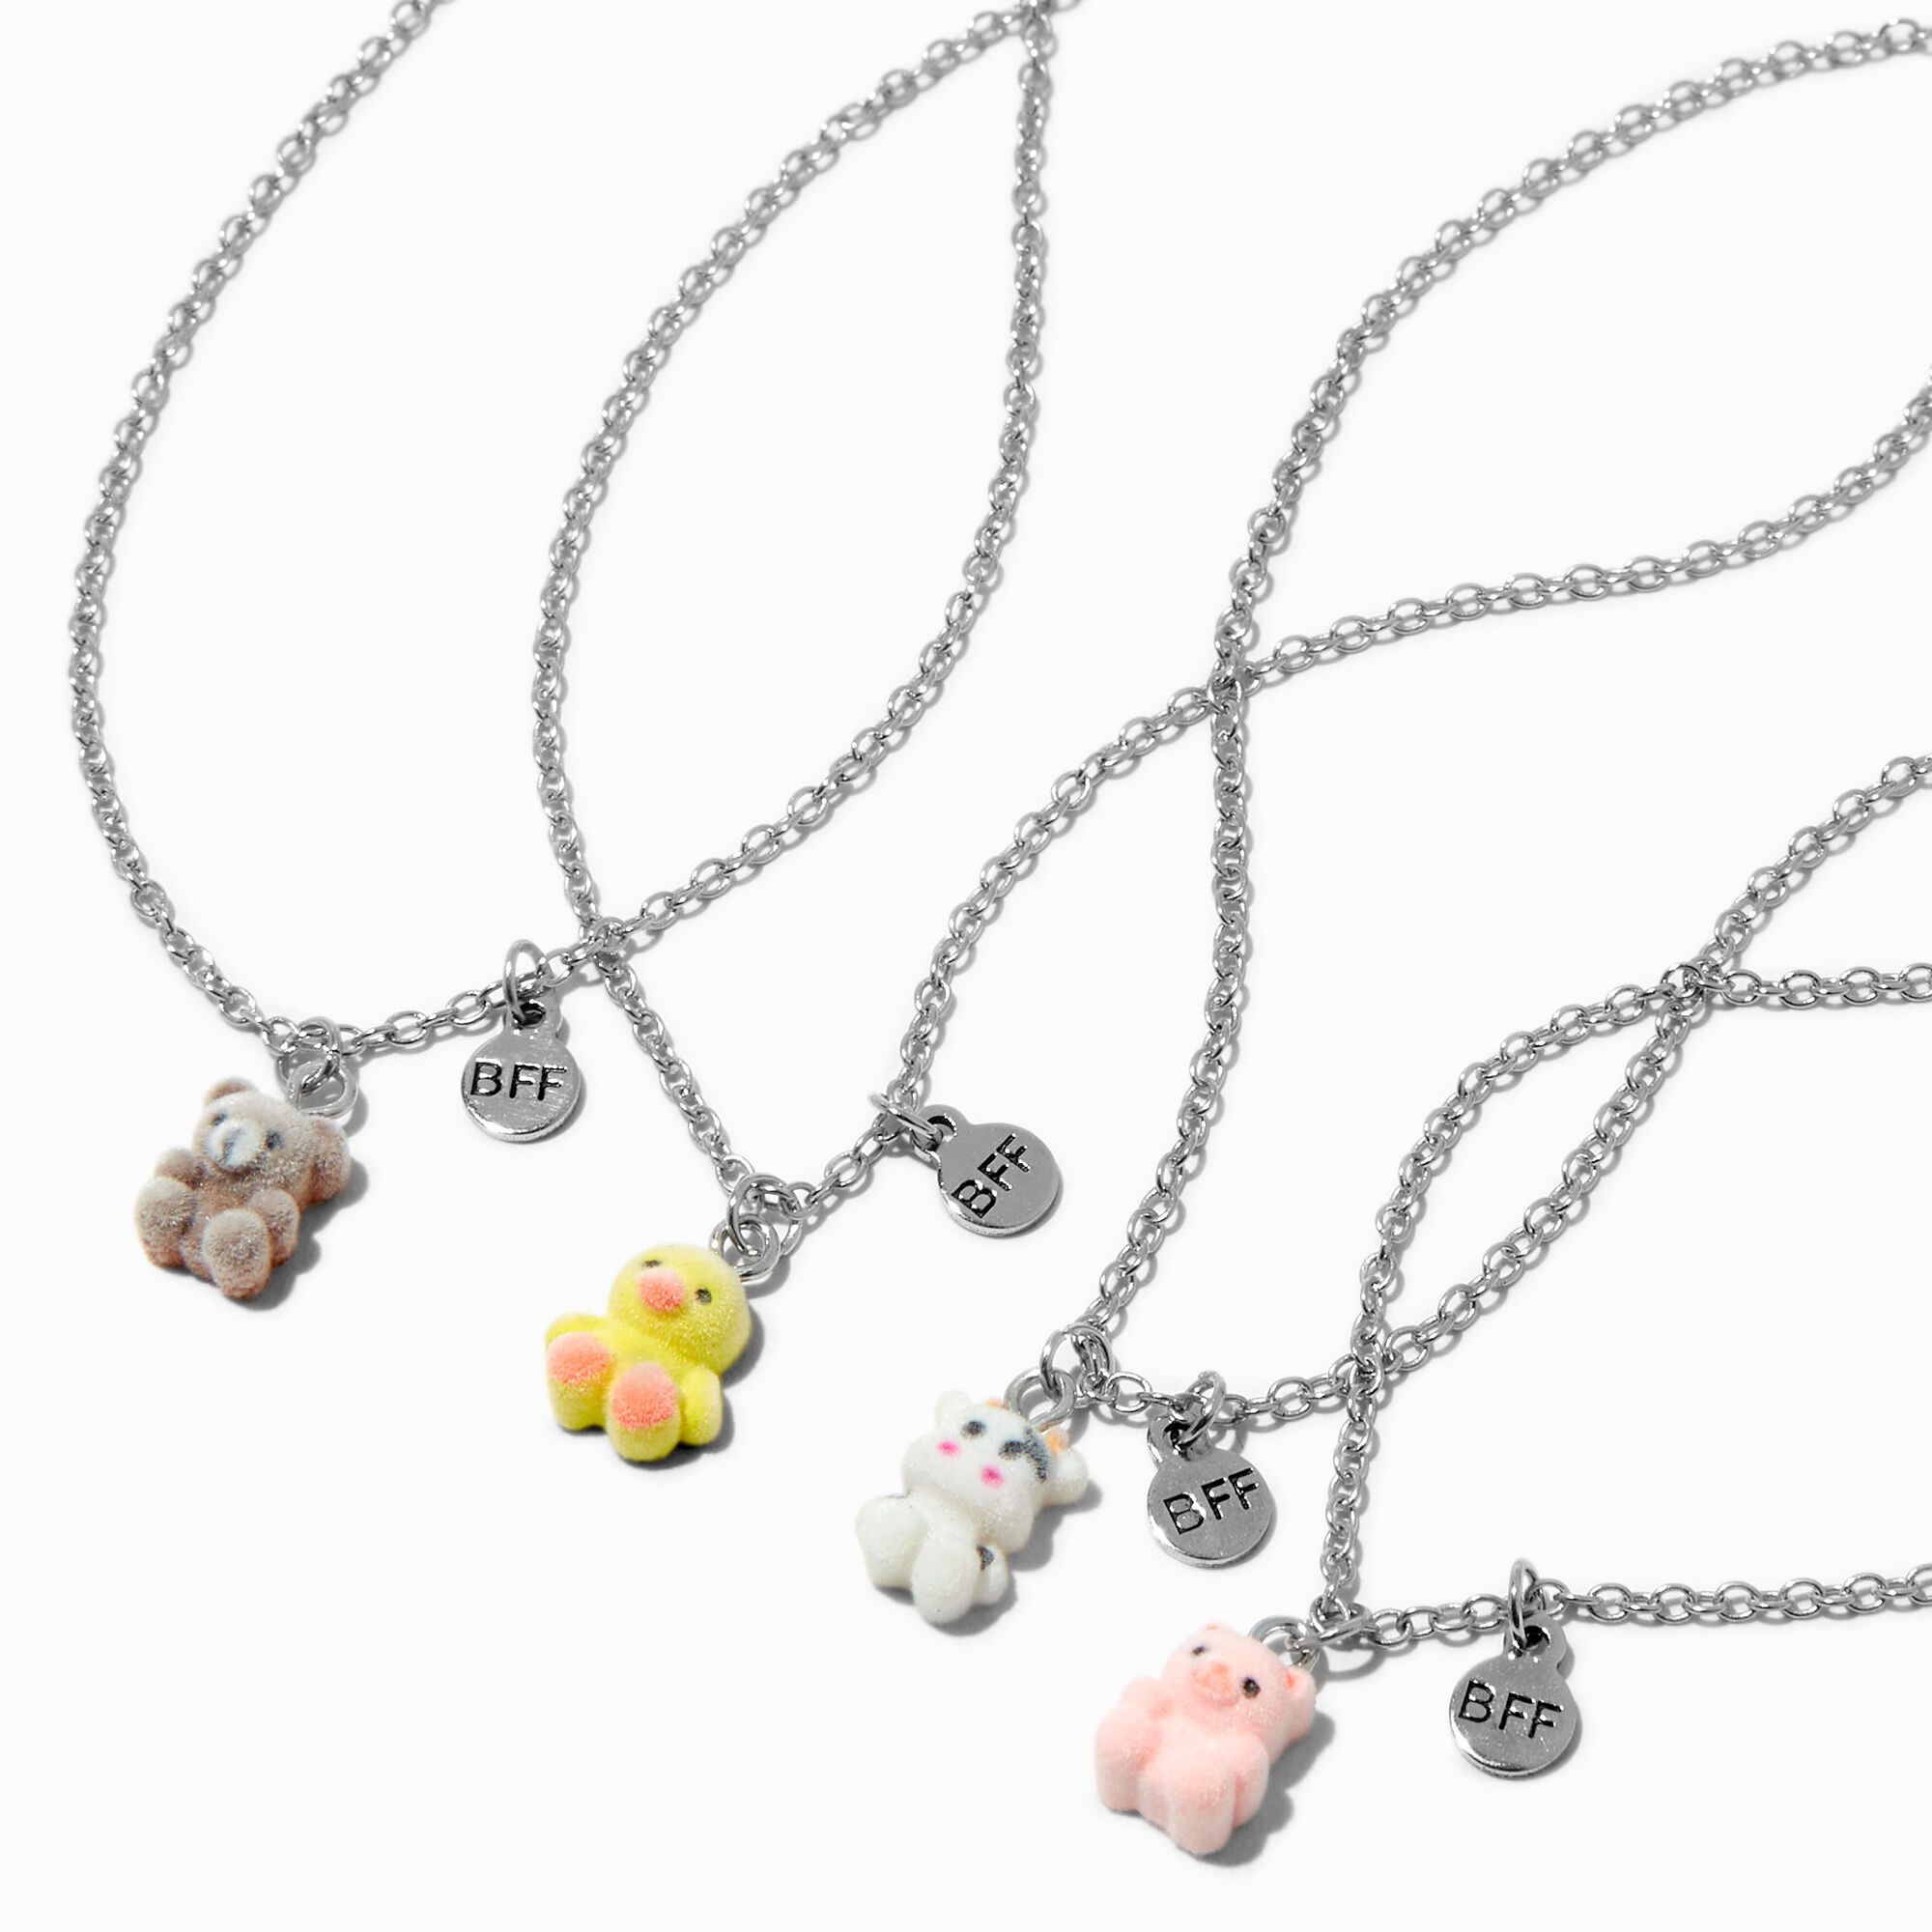 View Claires Best Friends Flocked Animal Pendant Necklaces 4 Pack Silver information